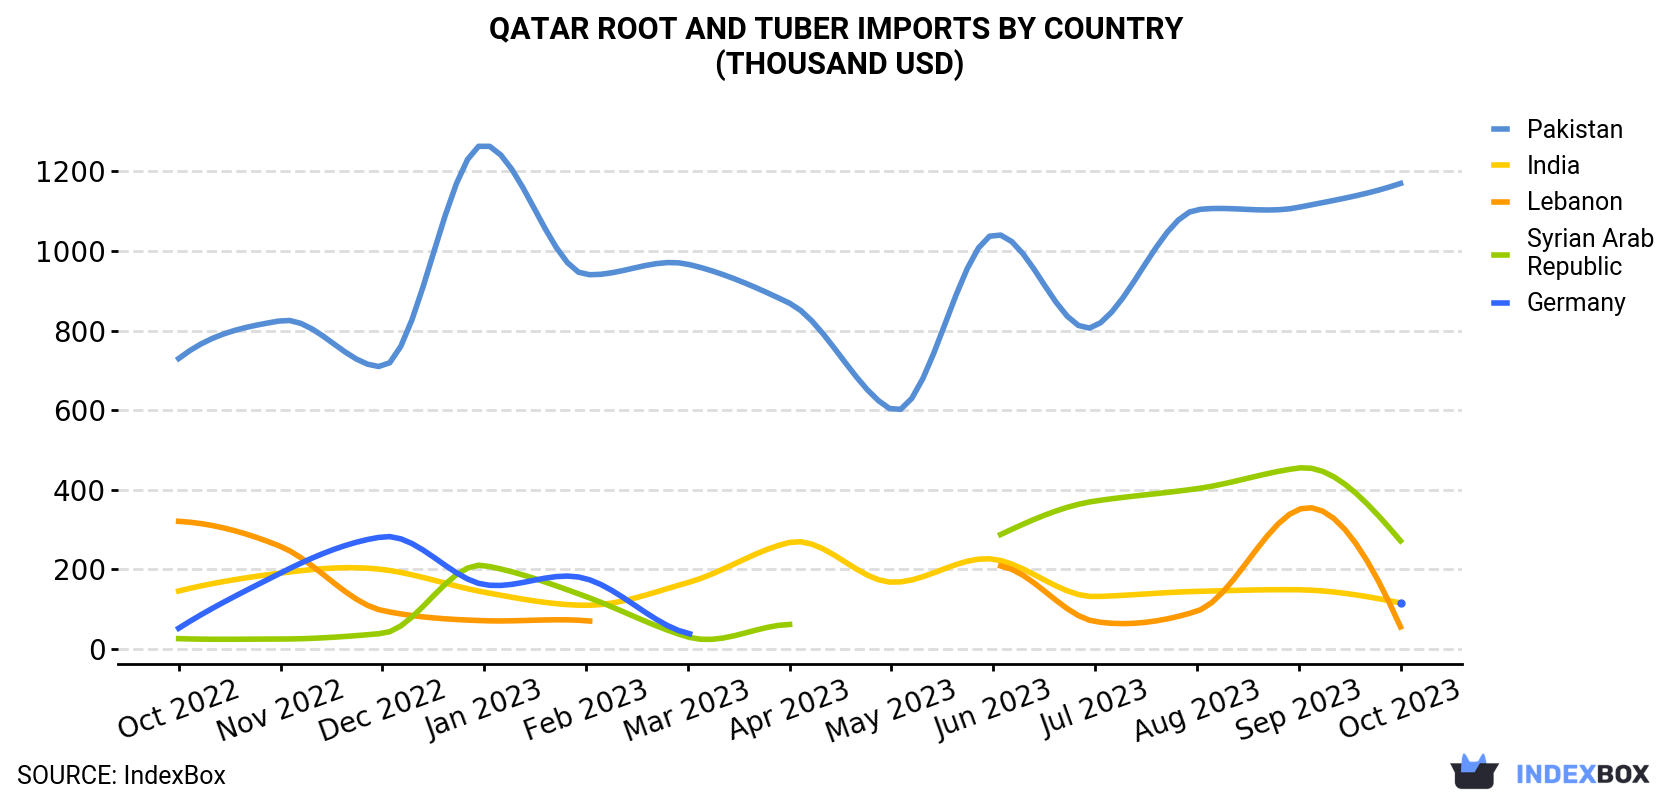 Qatar Root and Tuber Imports By Country (Thousand USD)